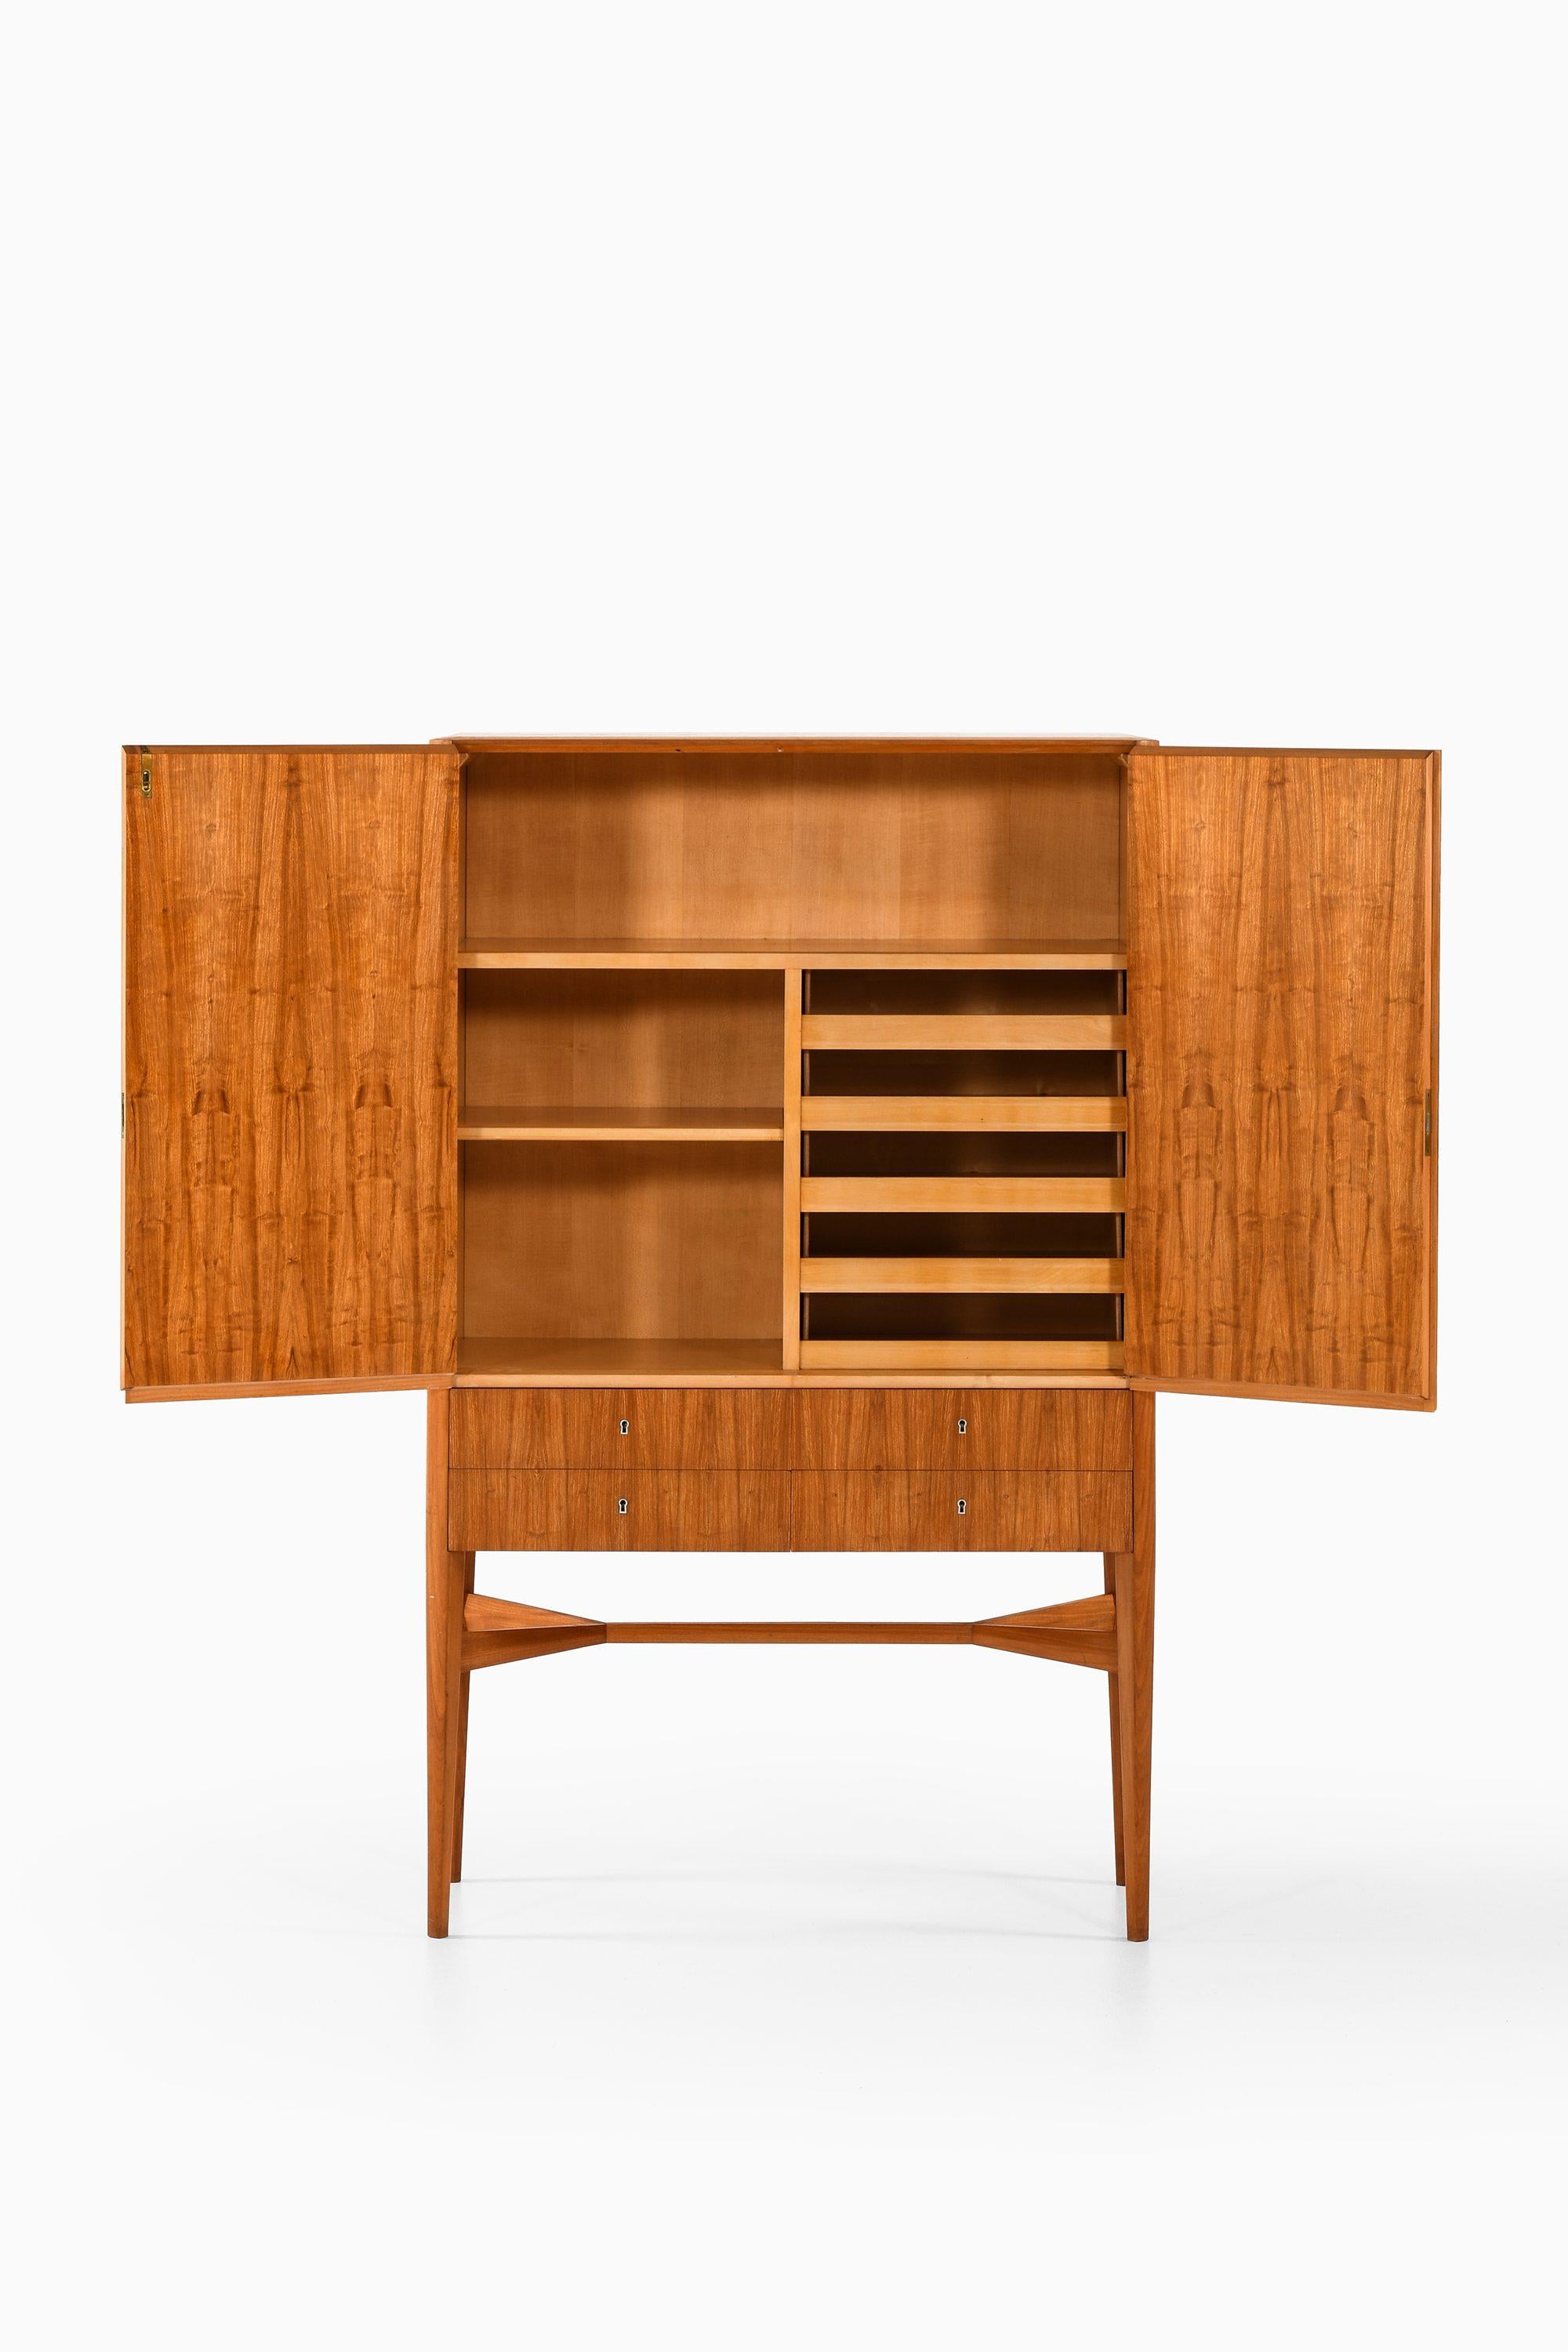 Swedish Freestanding Cabinet in Teak by Carl-Axel Acking, 1940s For Sale